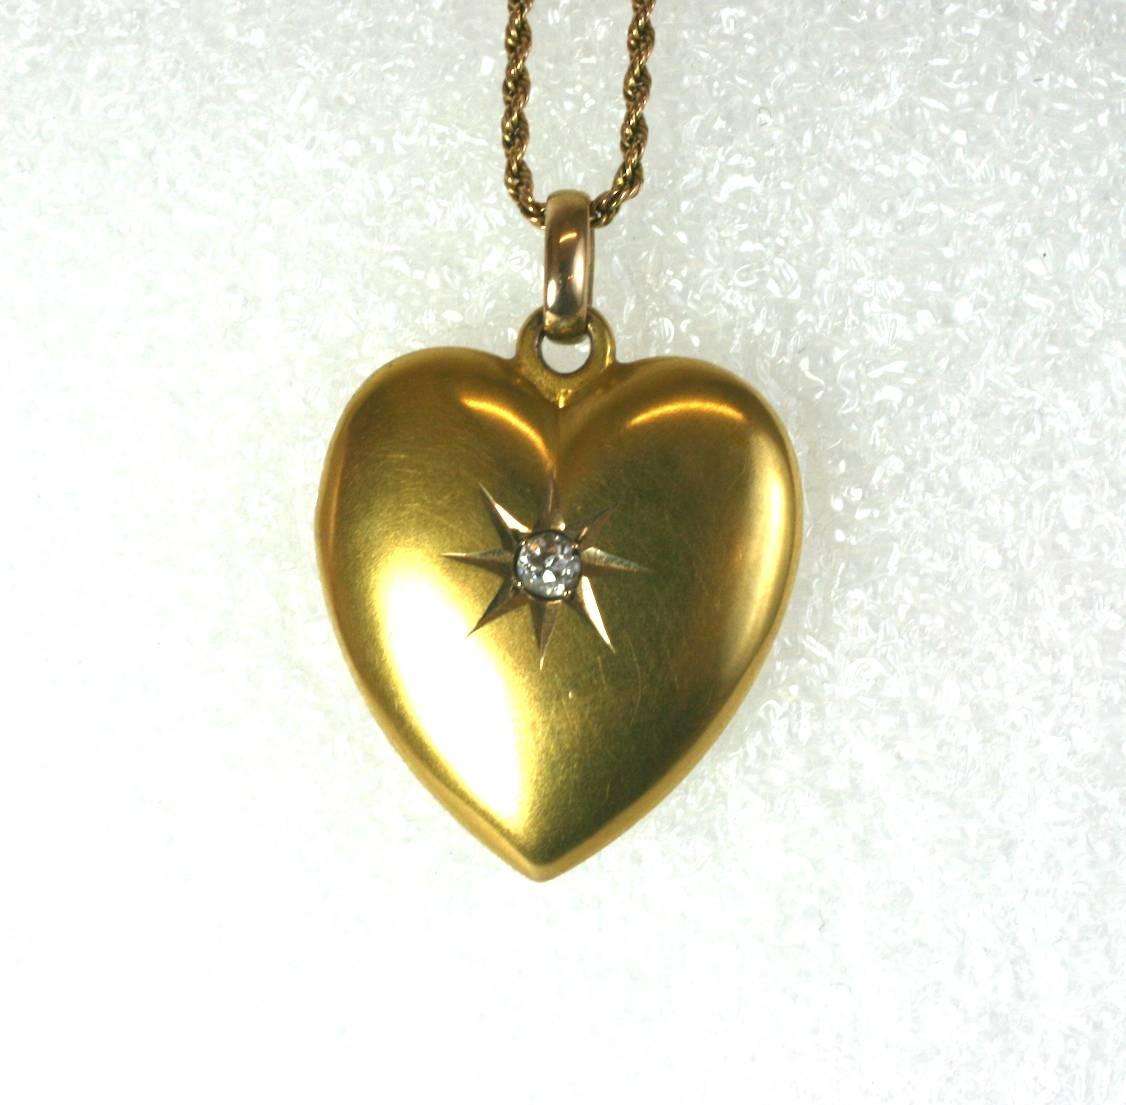 Lovely Antique Victorian Heart Pendant with antique, star set 10 point old cut diamond. Set in 14k gold with a period conjoined monogram on back. This heart pendant does not open.
Twisted antique 16